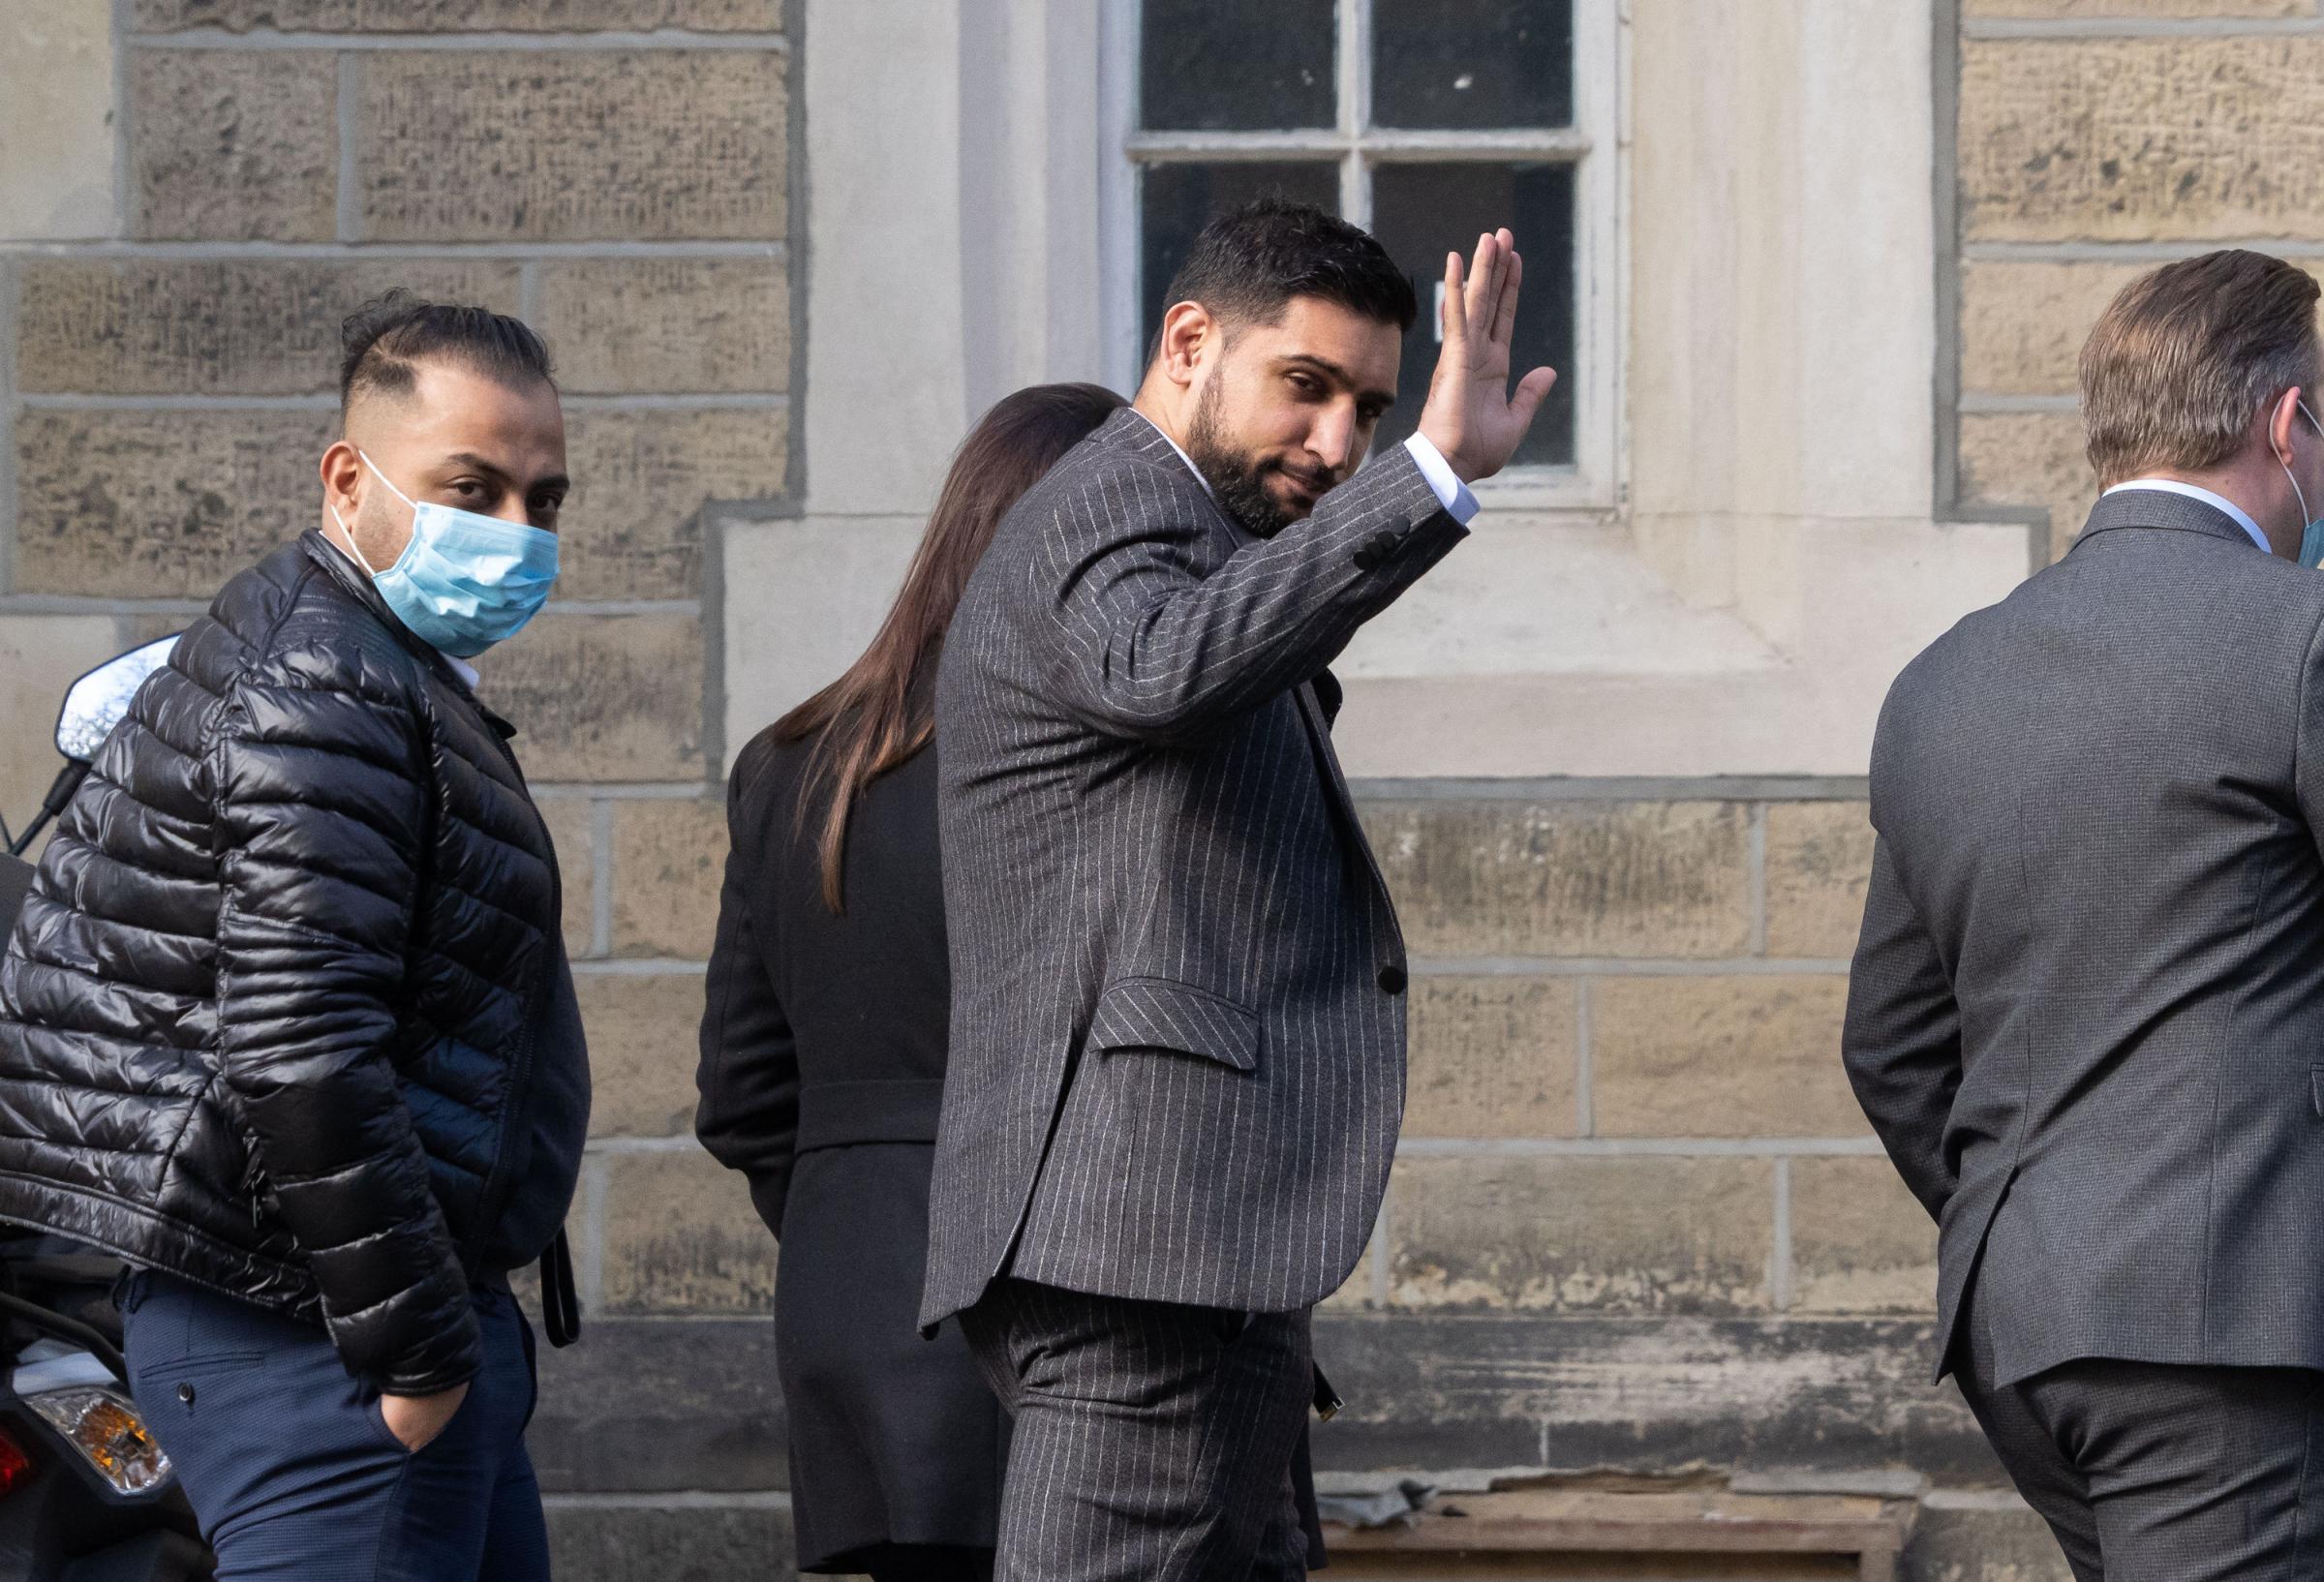 Former world boxing champion Amir Khan, waves as he arrives at Snaresbrook Crown Court, in east London, where three men are accused of robbing the boxer of a diamond watch at gunpoint. Khans 72,000 custom-made Franck Muller watch was stolen in High